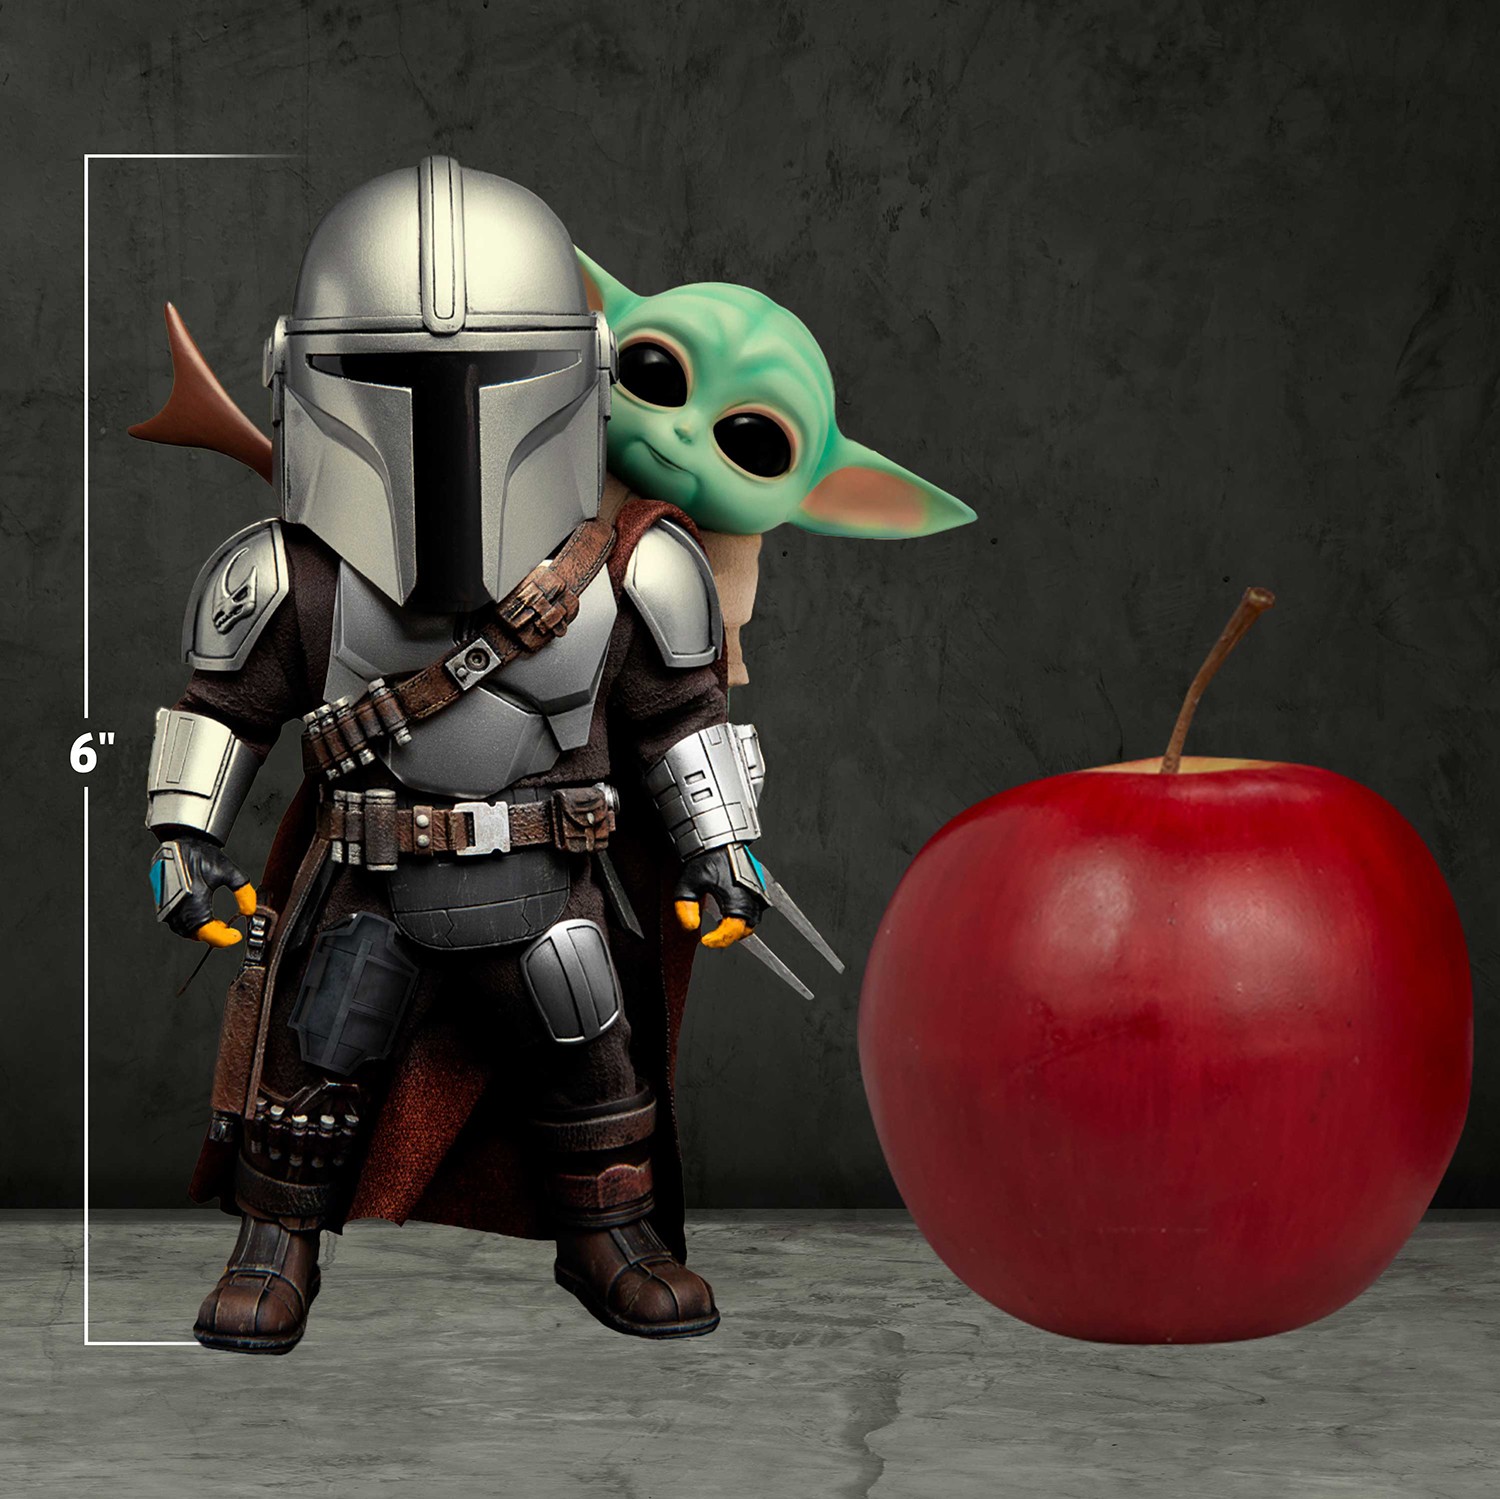 The Mandalorian and The Child- Prototype Shown